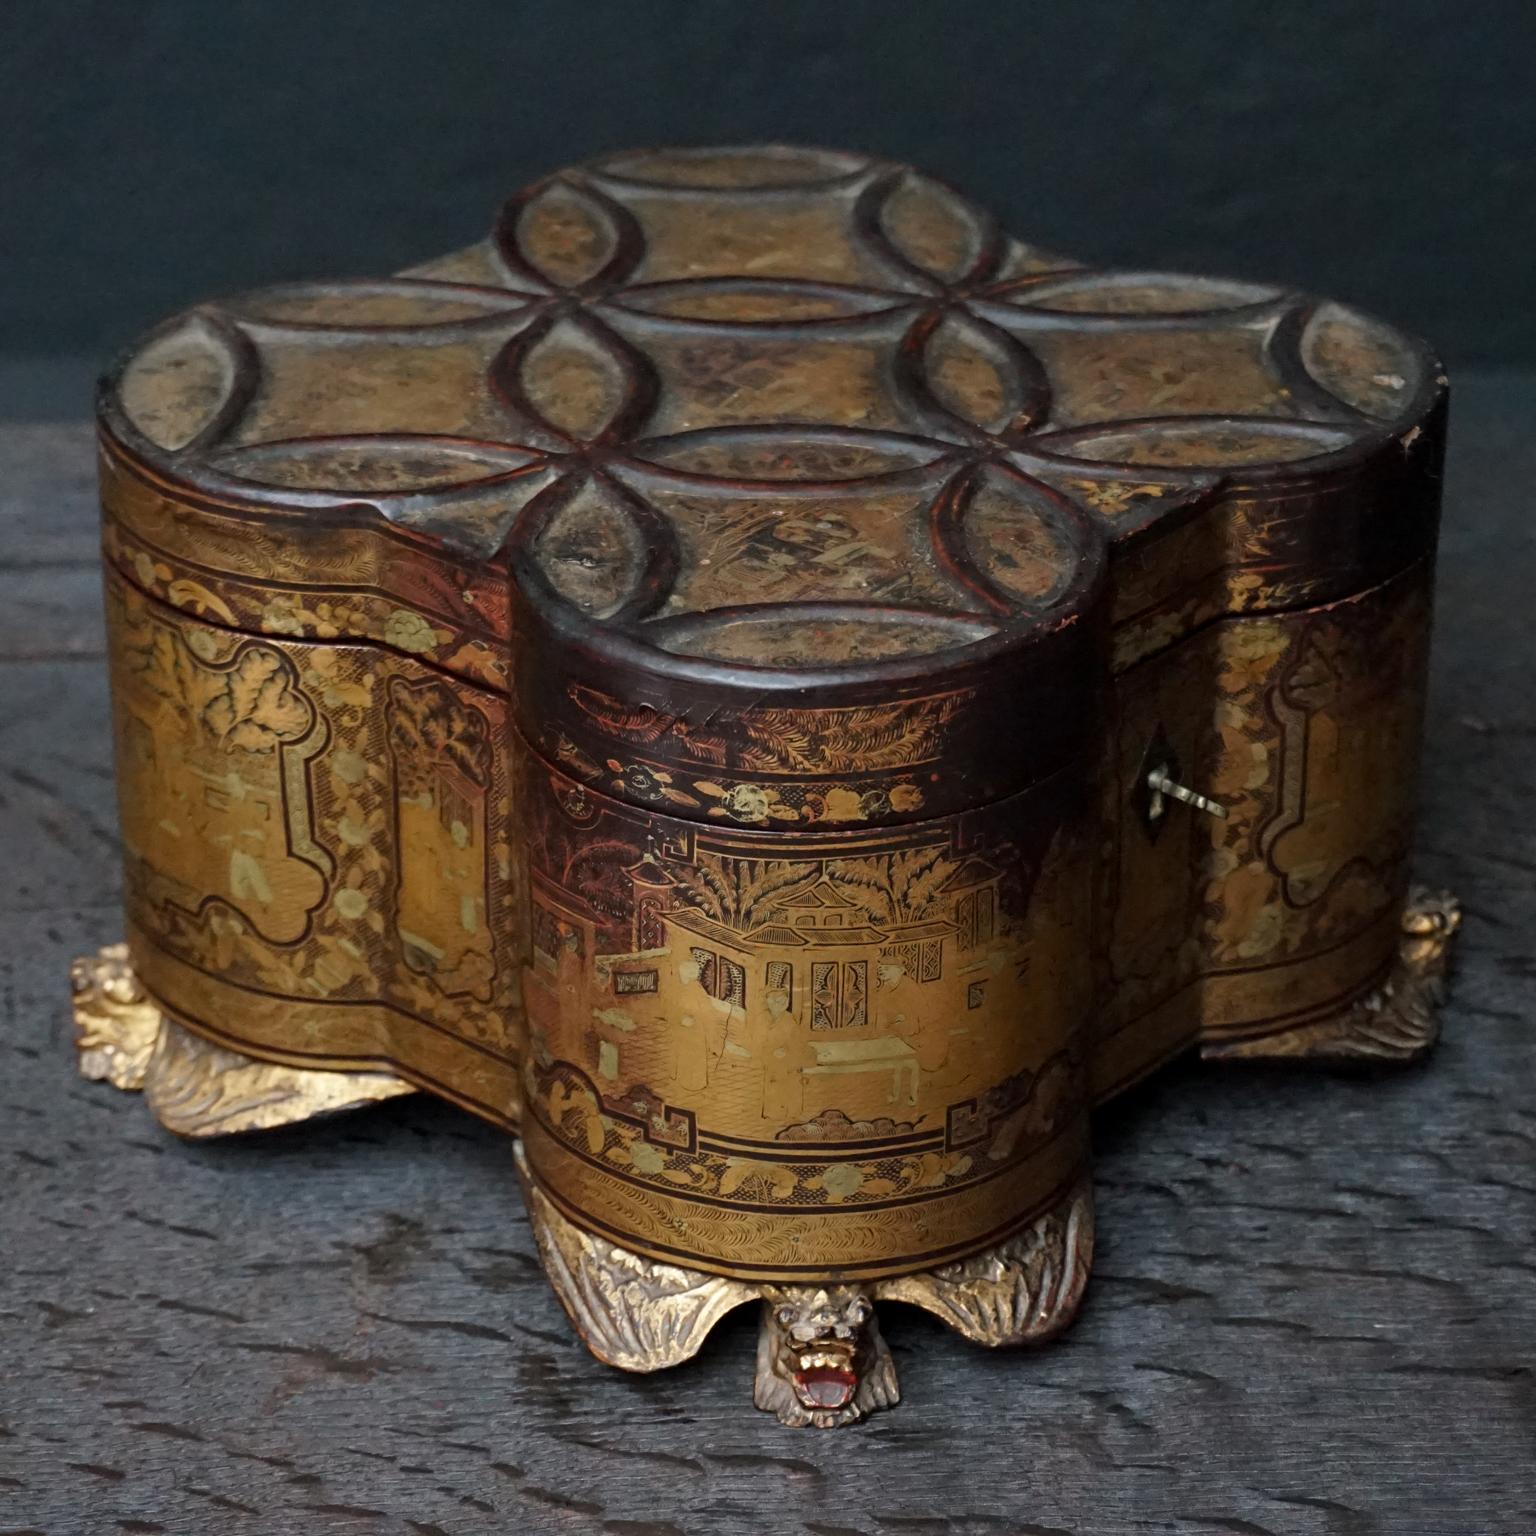 Clover or quartreform shaped mid-19th century Chinese canton export tea caddy in gold lacquered wood on a black background.
Decorated with palace scenes animated with figures engaged in various pursuits within walled gardens.
Interior with pewter